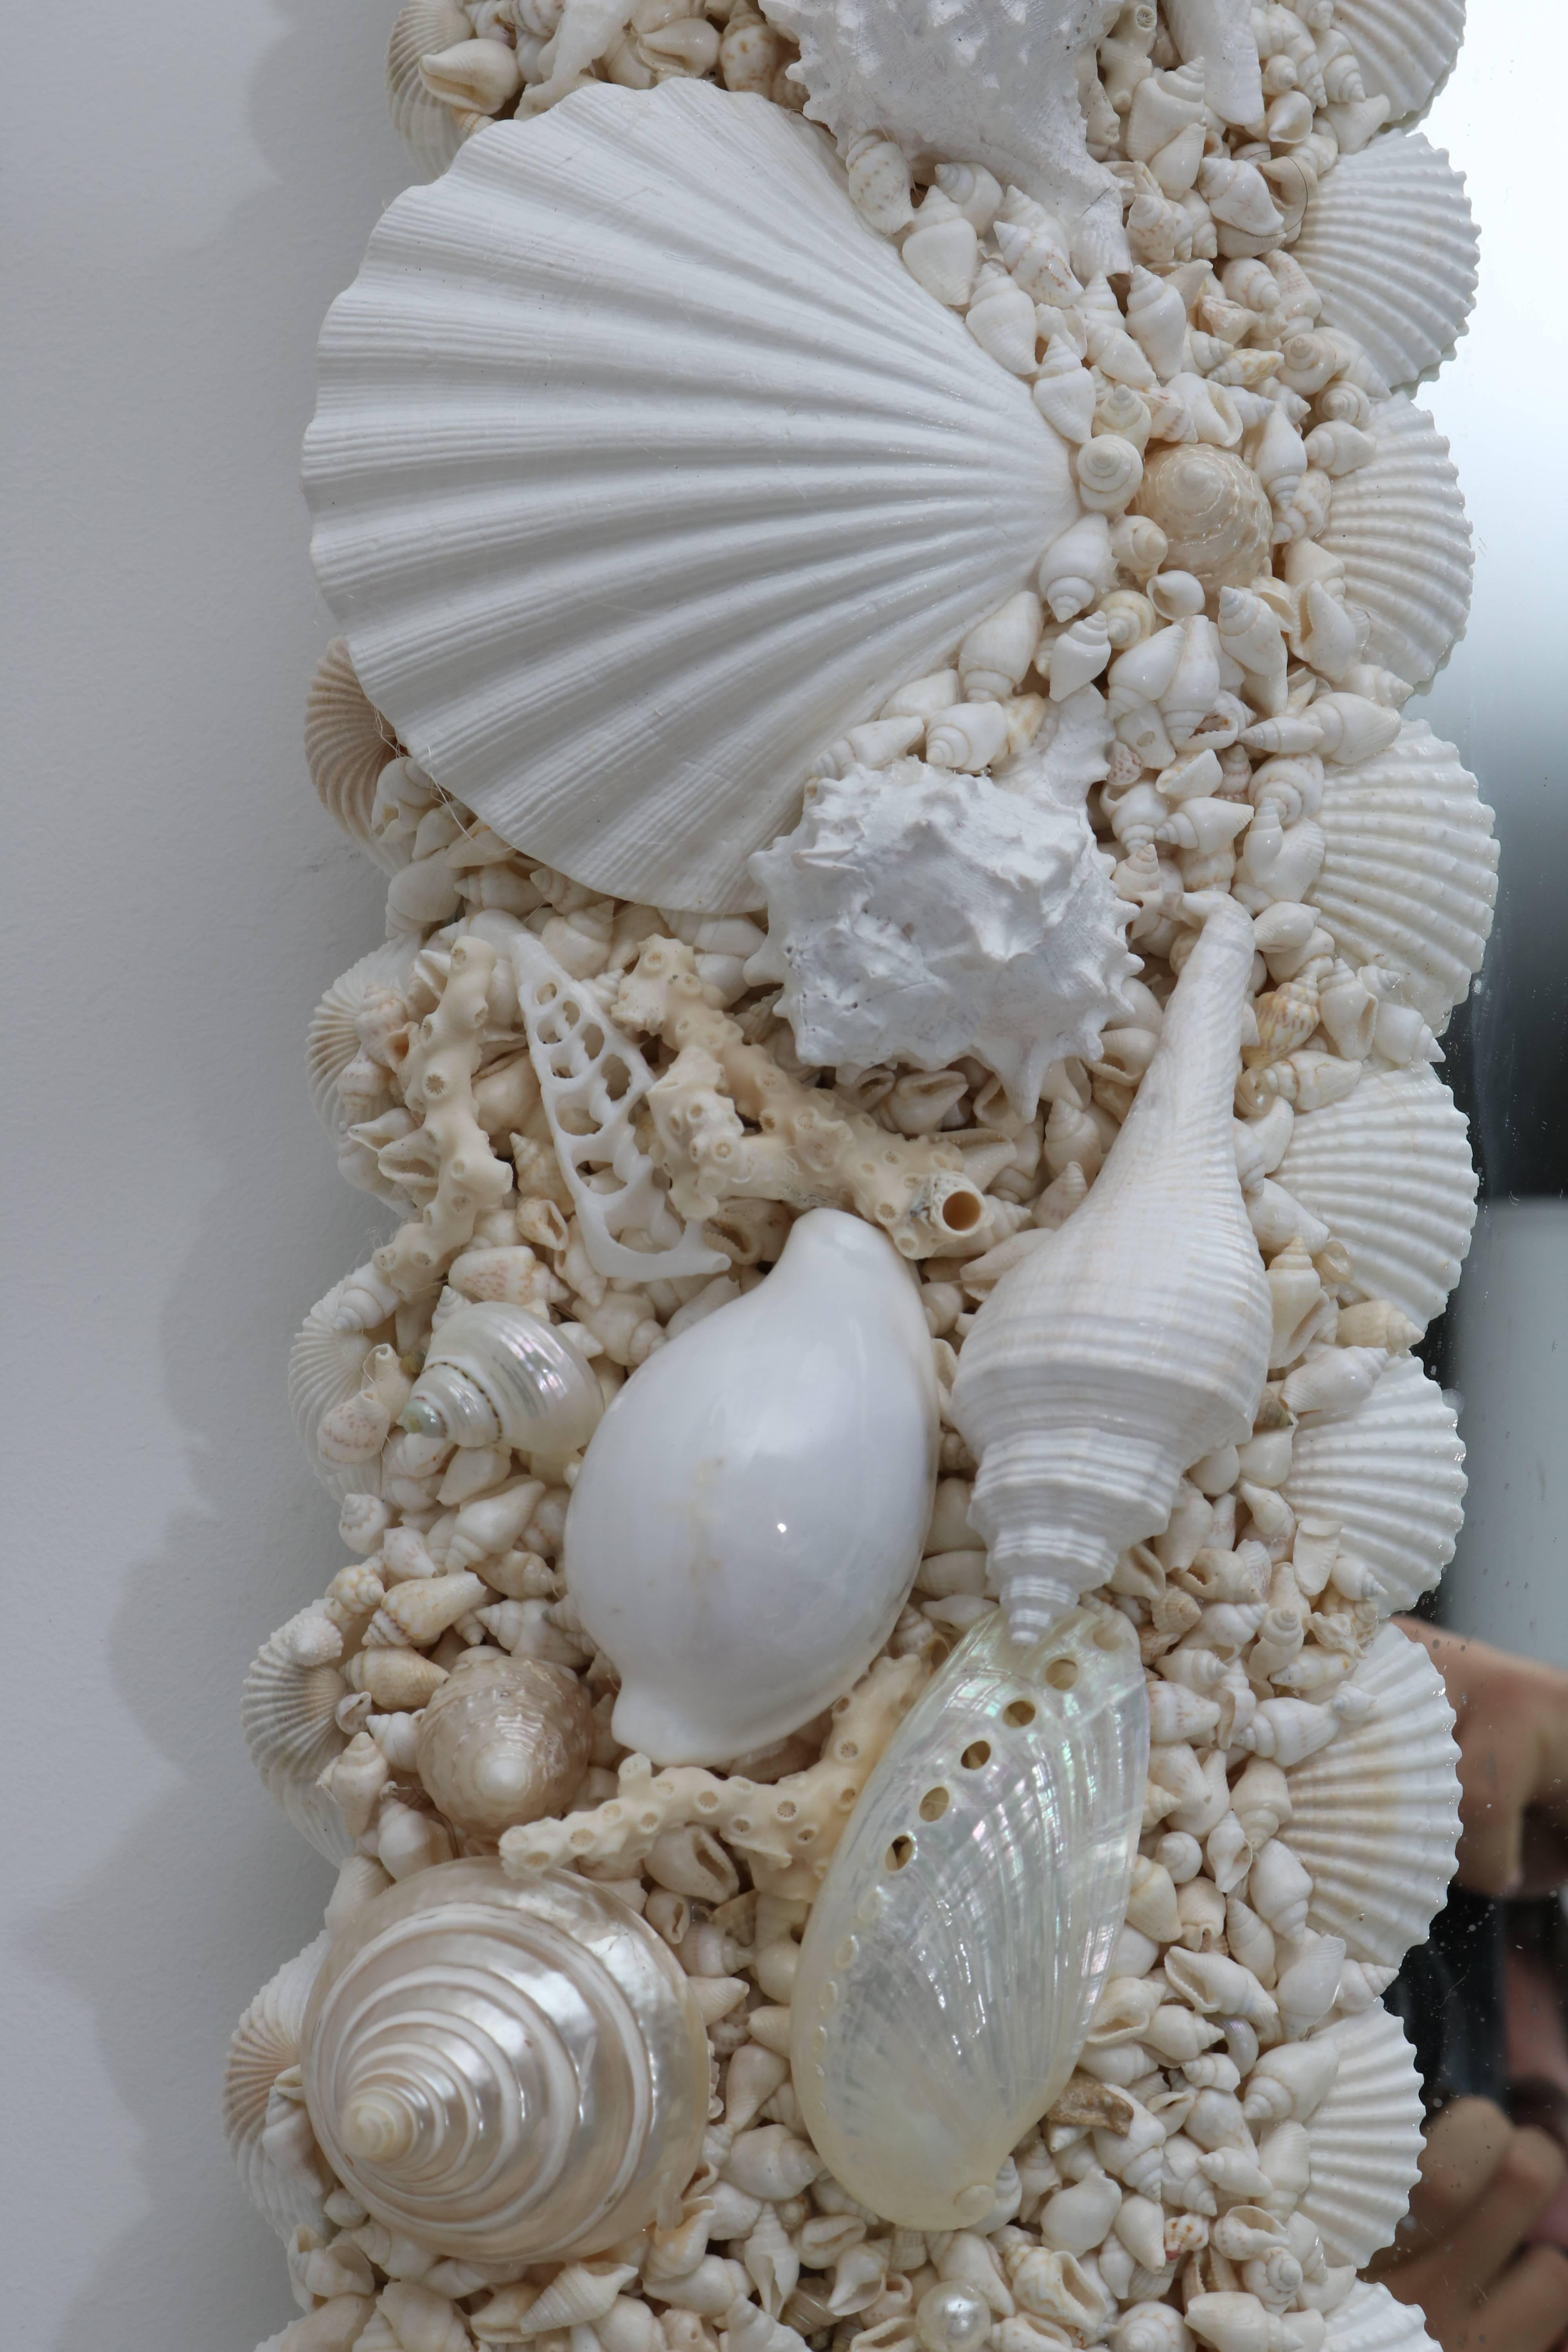 Contemporary Tony Duquette Style Sea Shell Encrusted Mirror in White and Pearlized Coloration